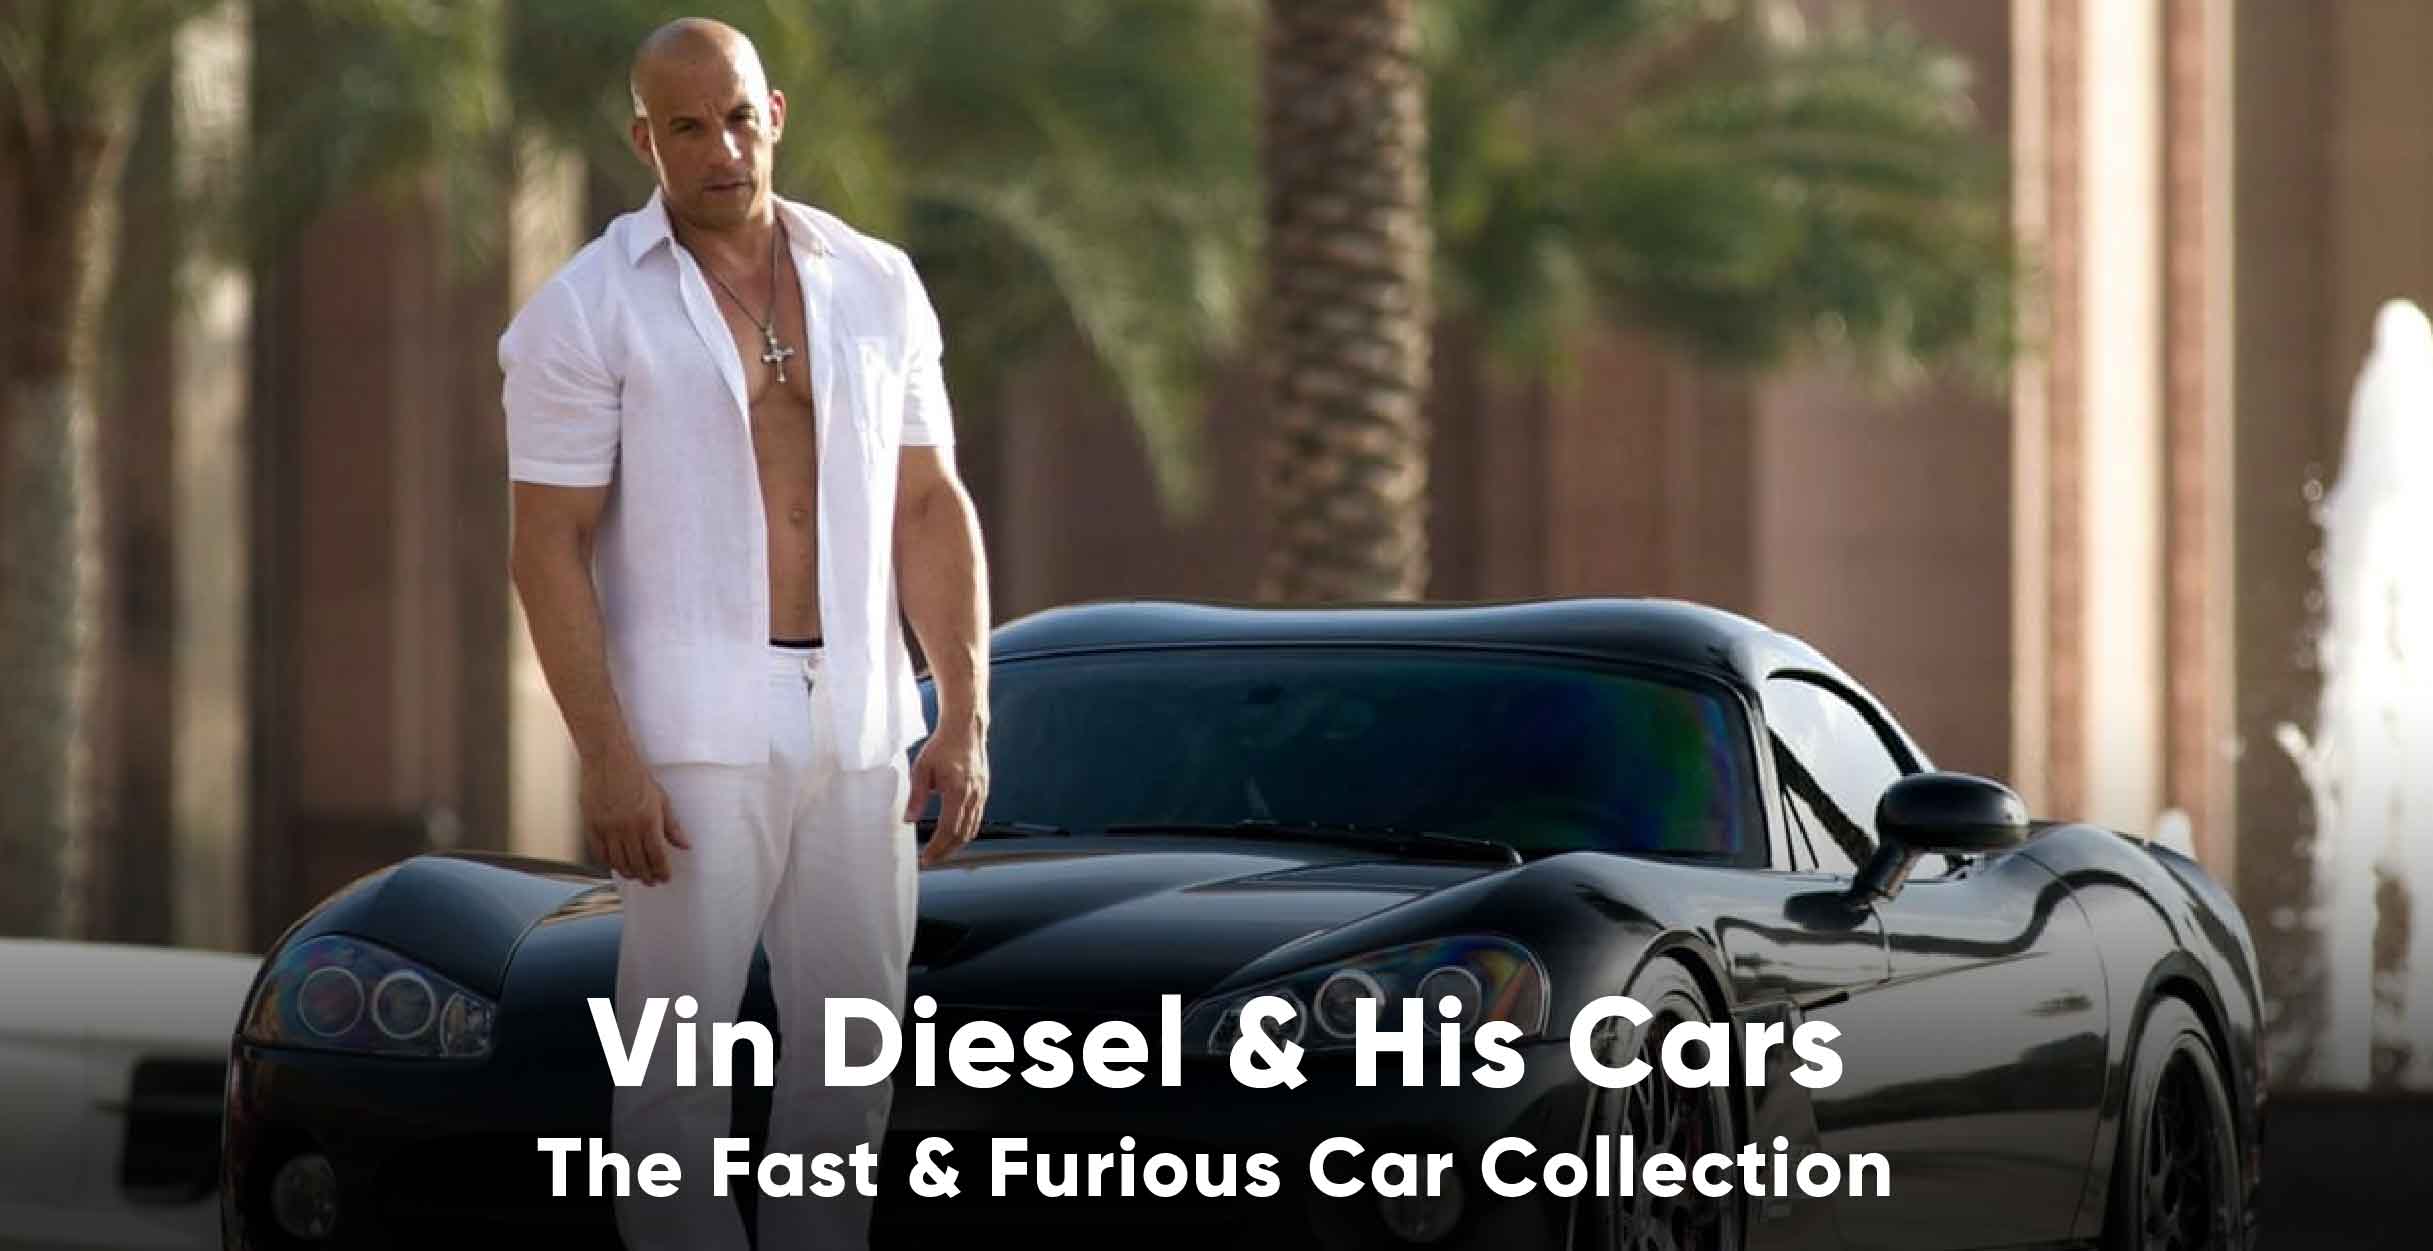 Vin Diesel Cars | The Fast & Furious Car Collection